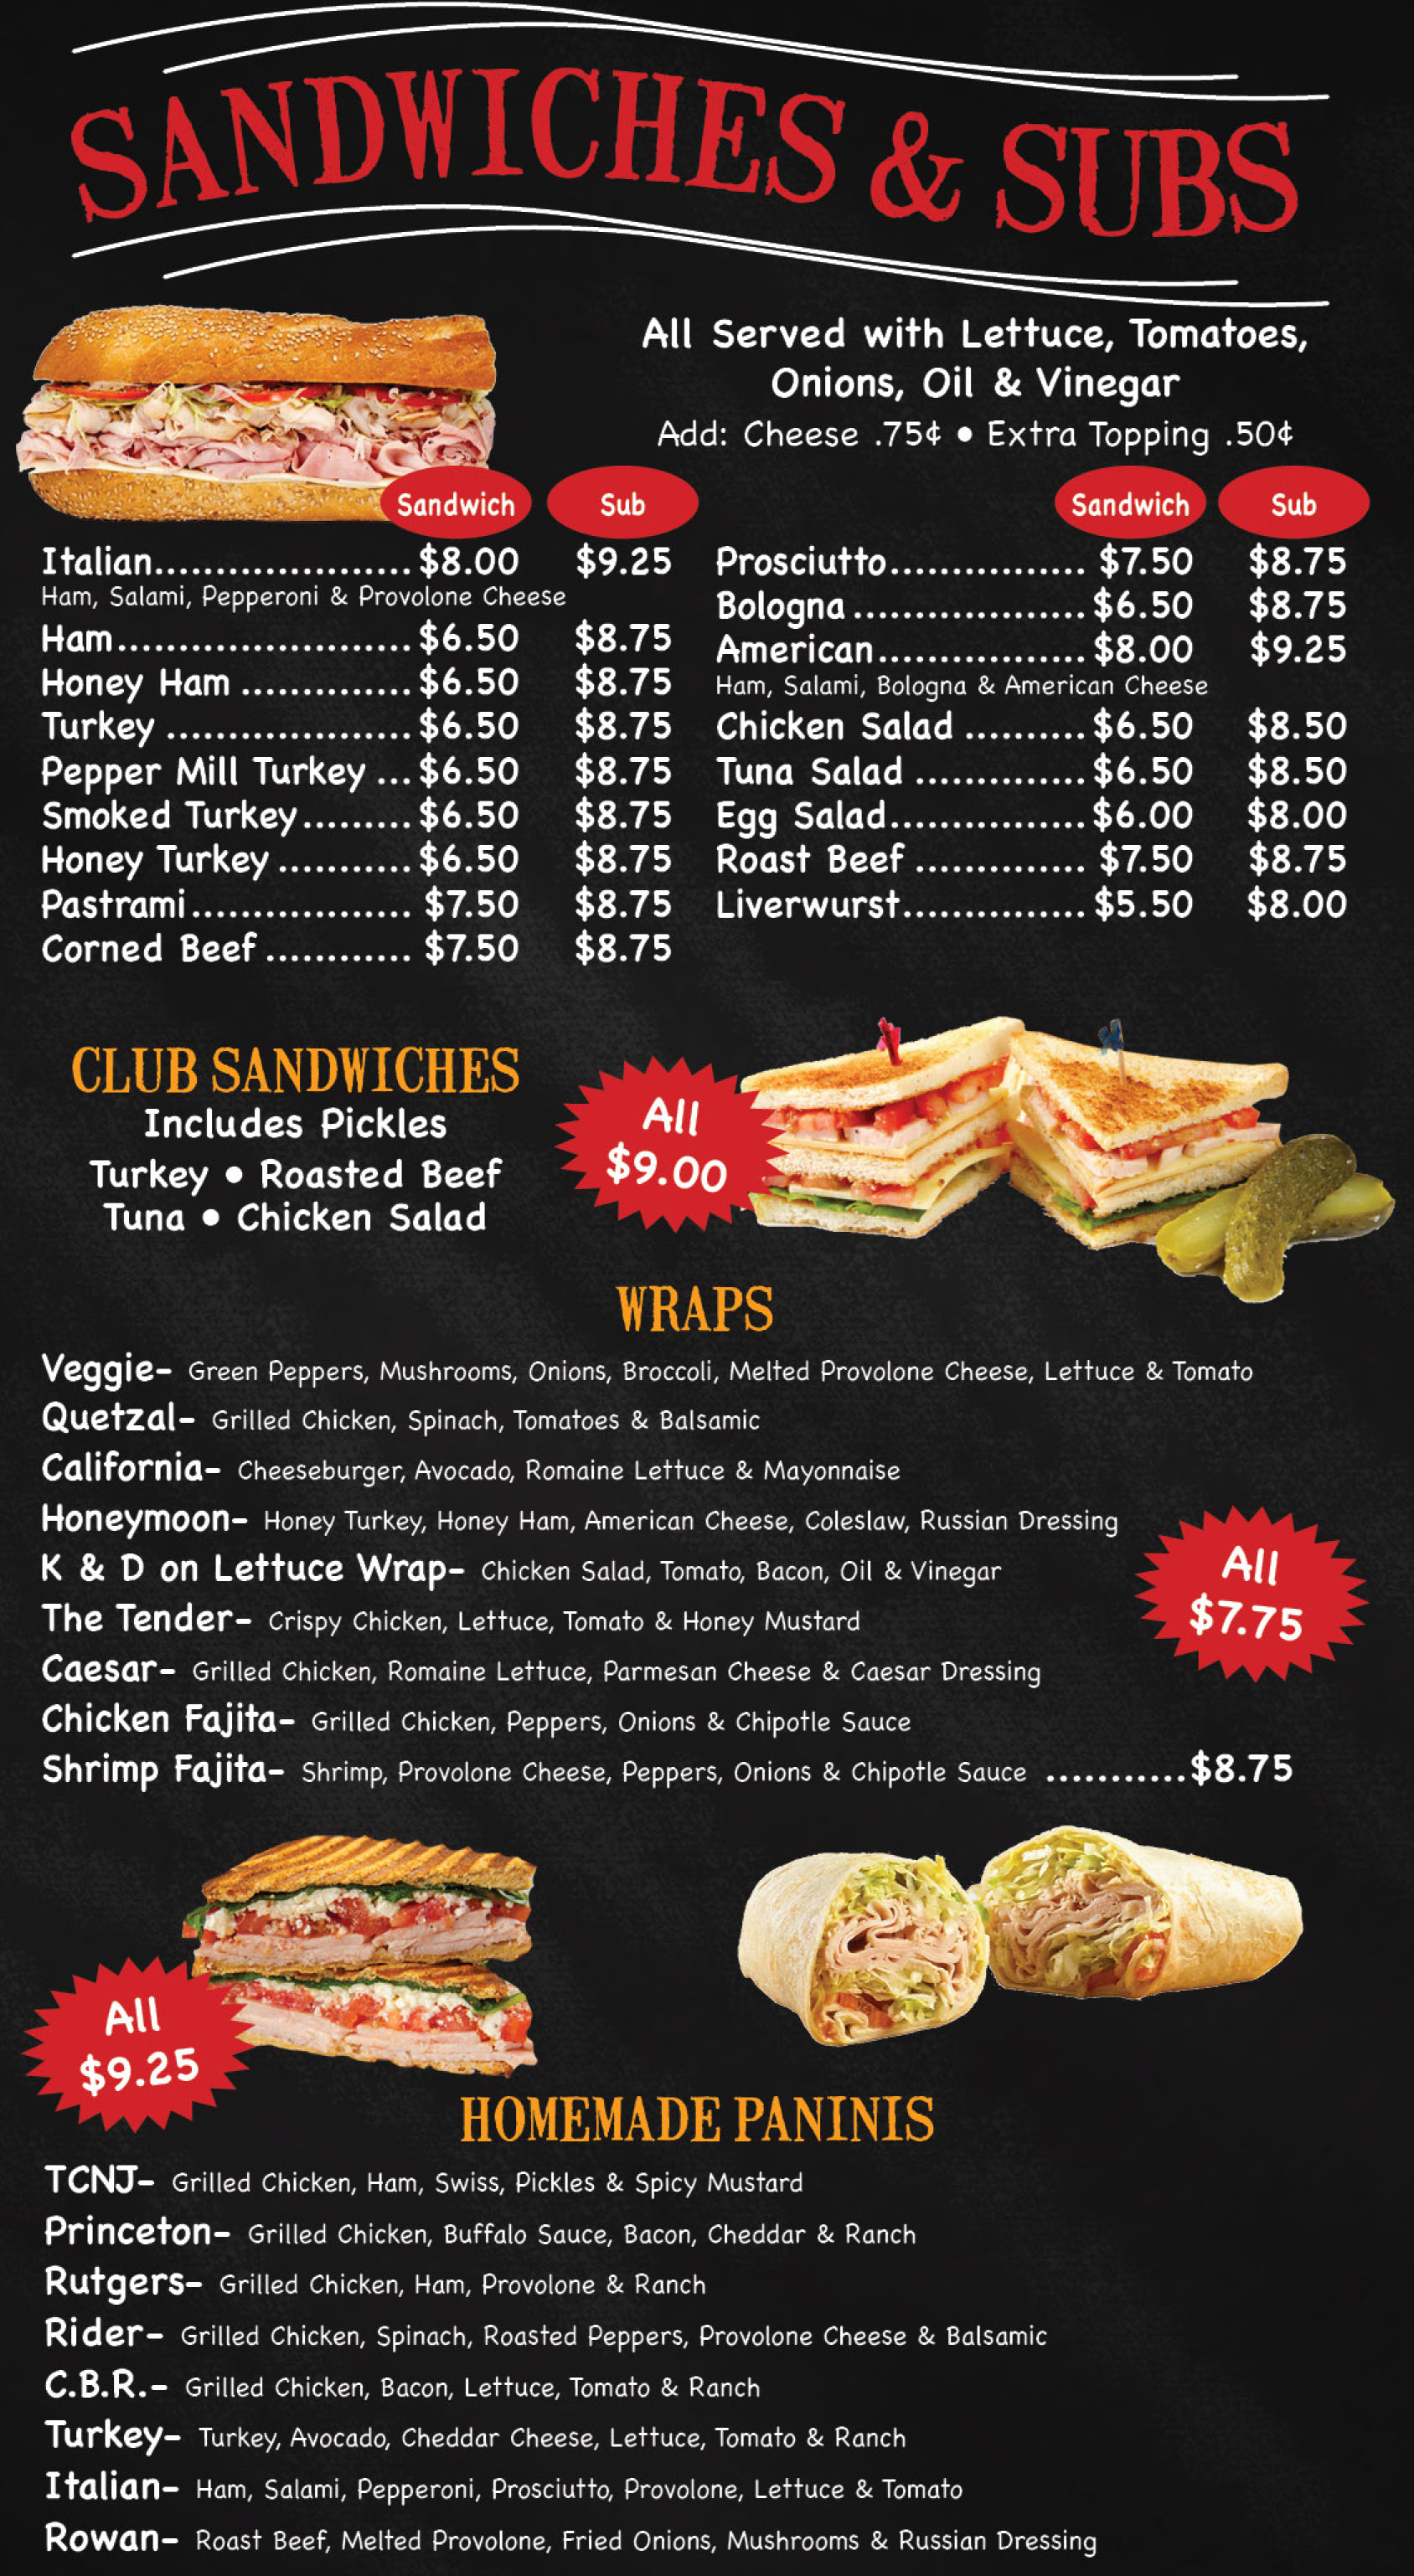 Sandwiches & Subs